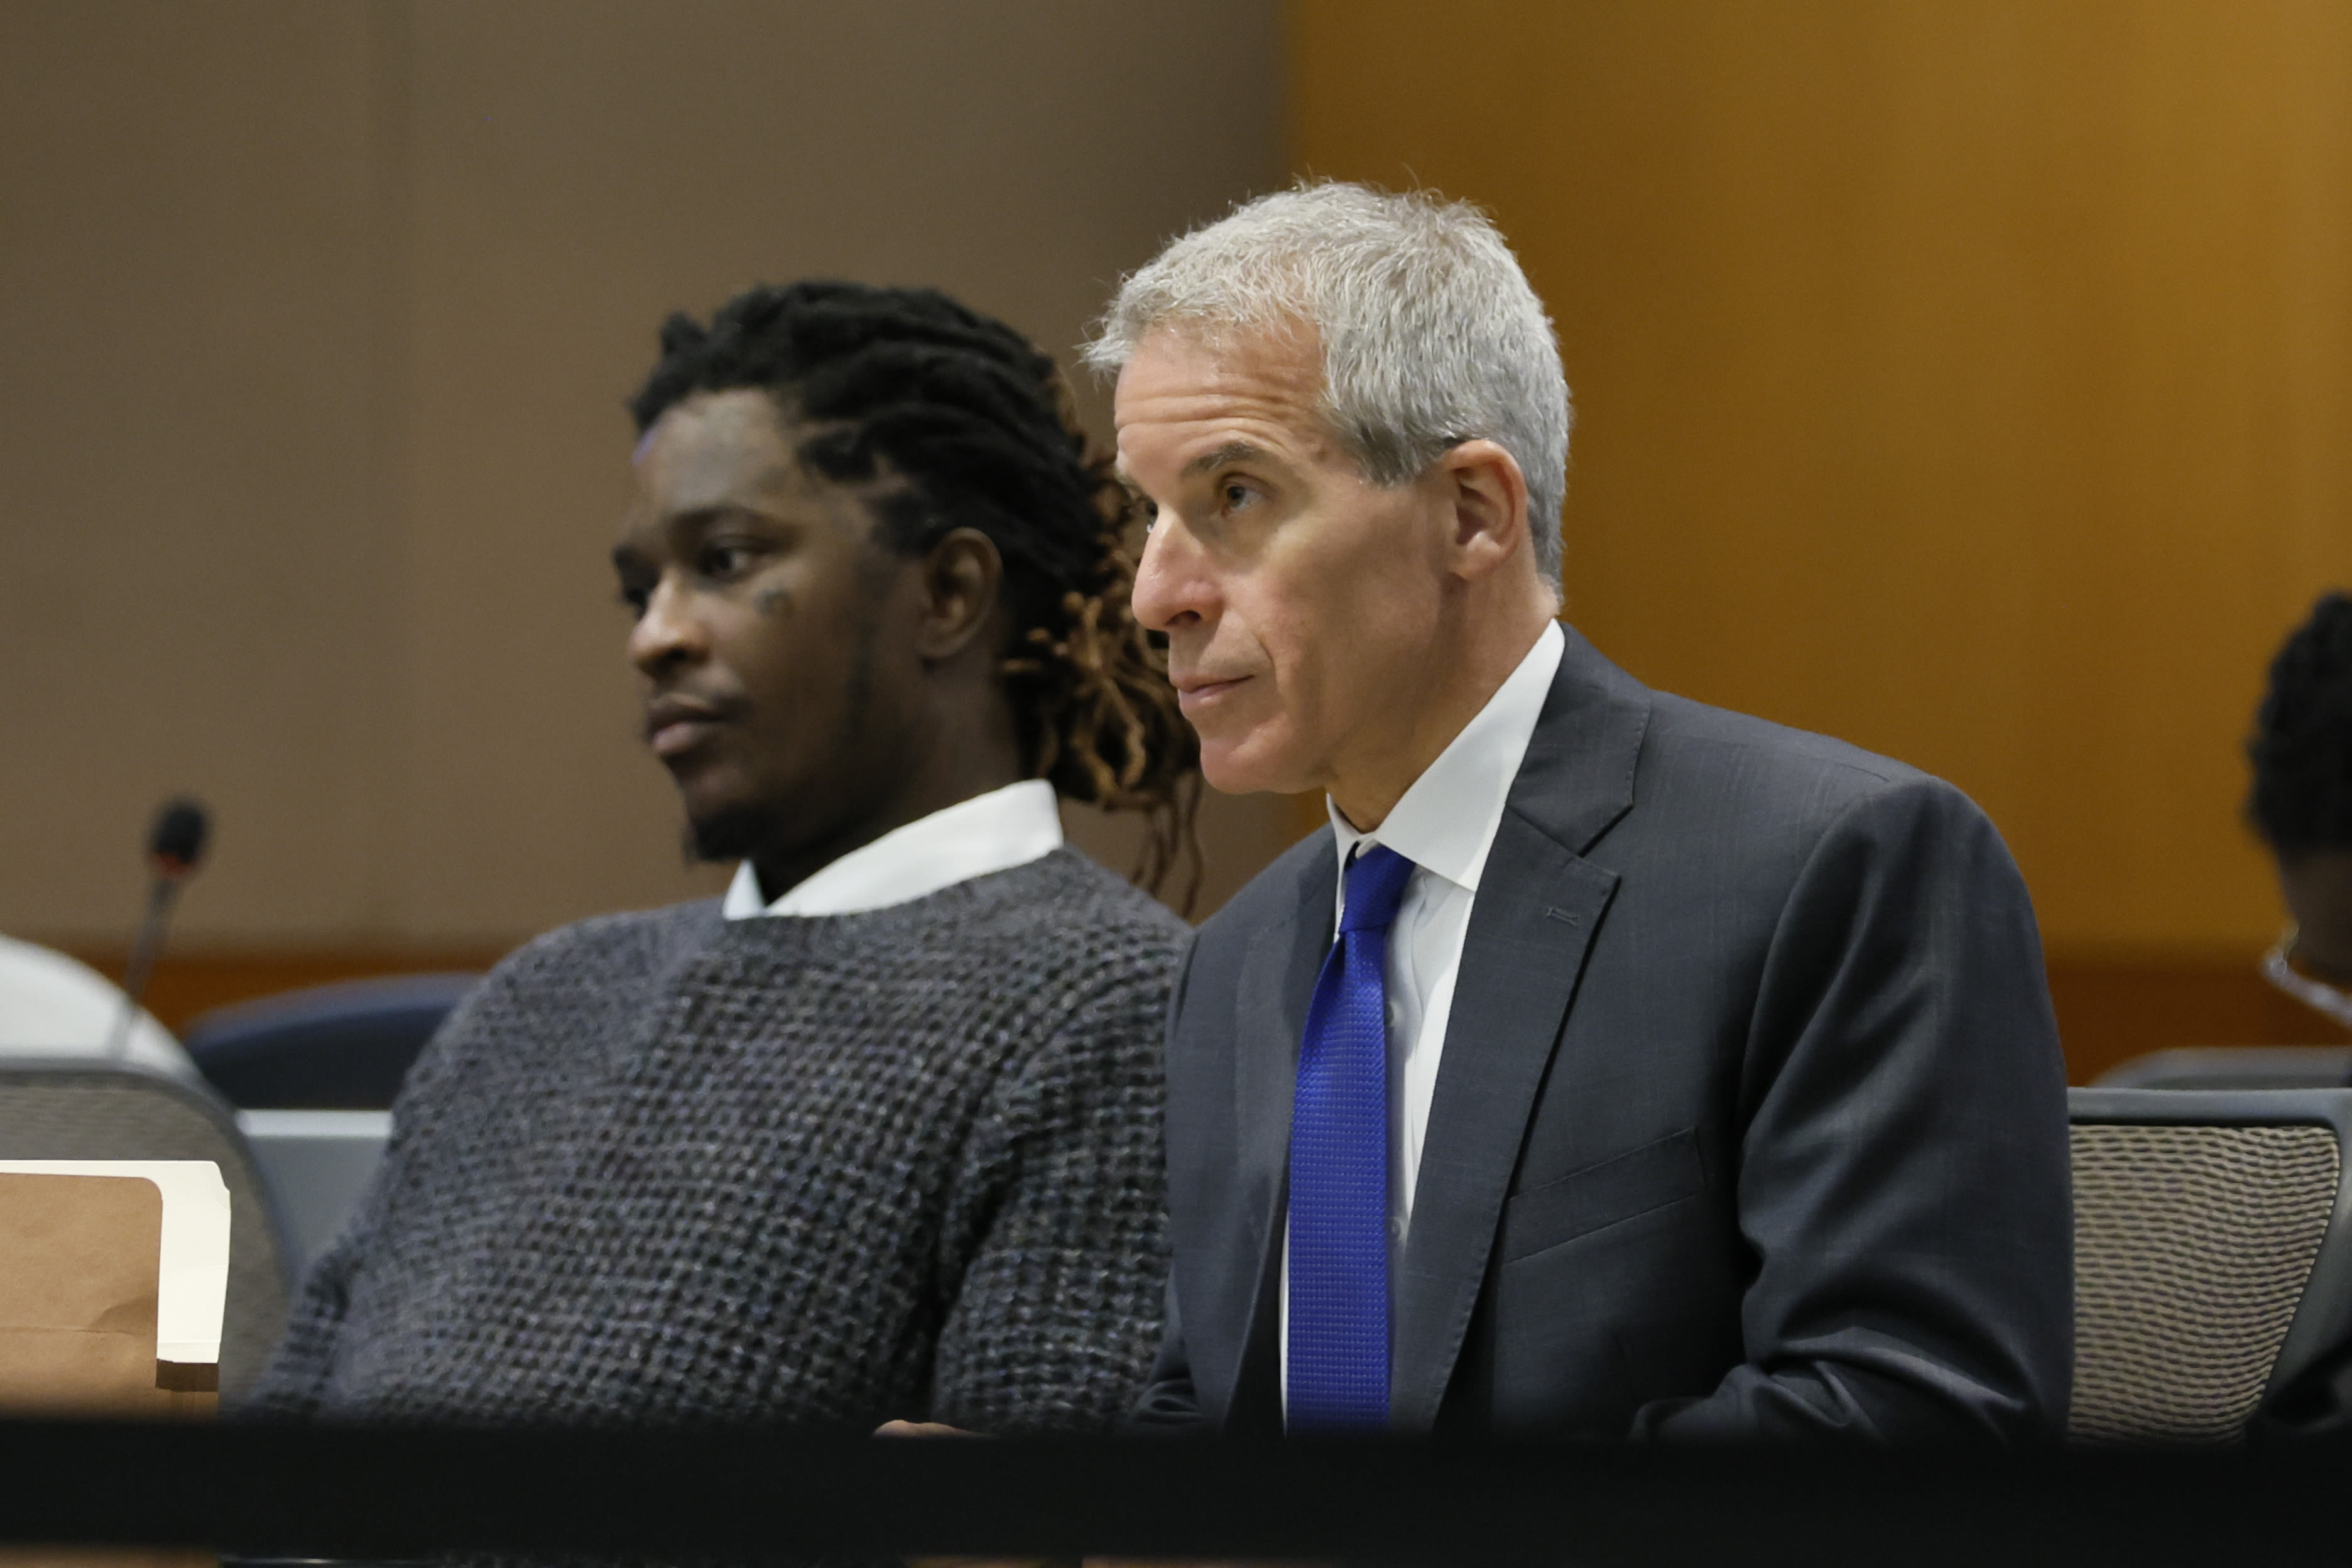 Judge halts Young Thug trial in Georgia amid complaints of misconduct